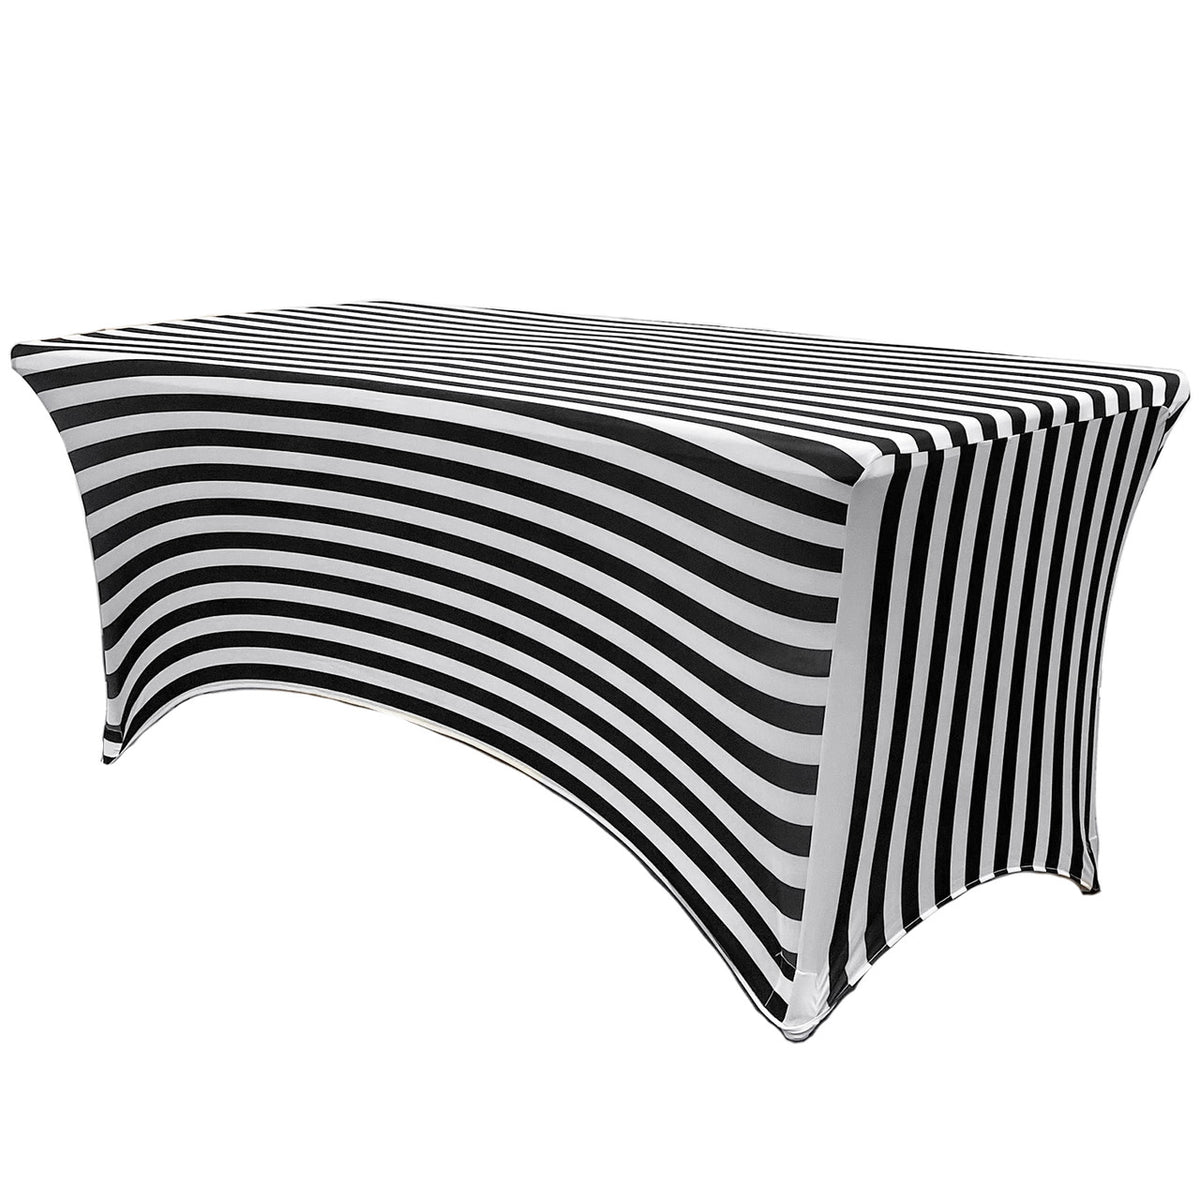 Print Spandex Folding Chair Cover in Black and White Striped – Urquid Linen